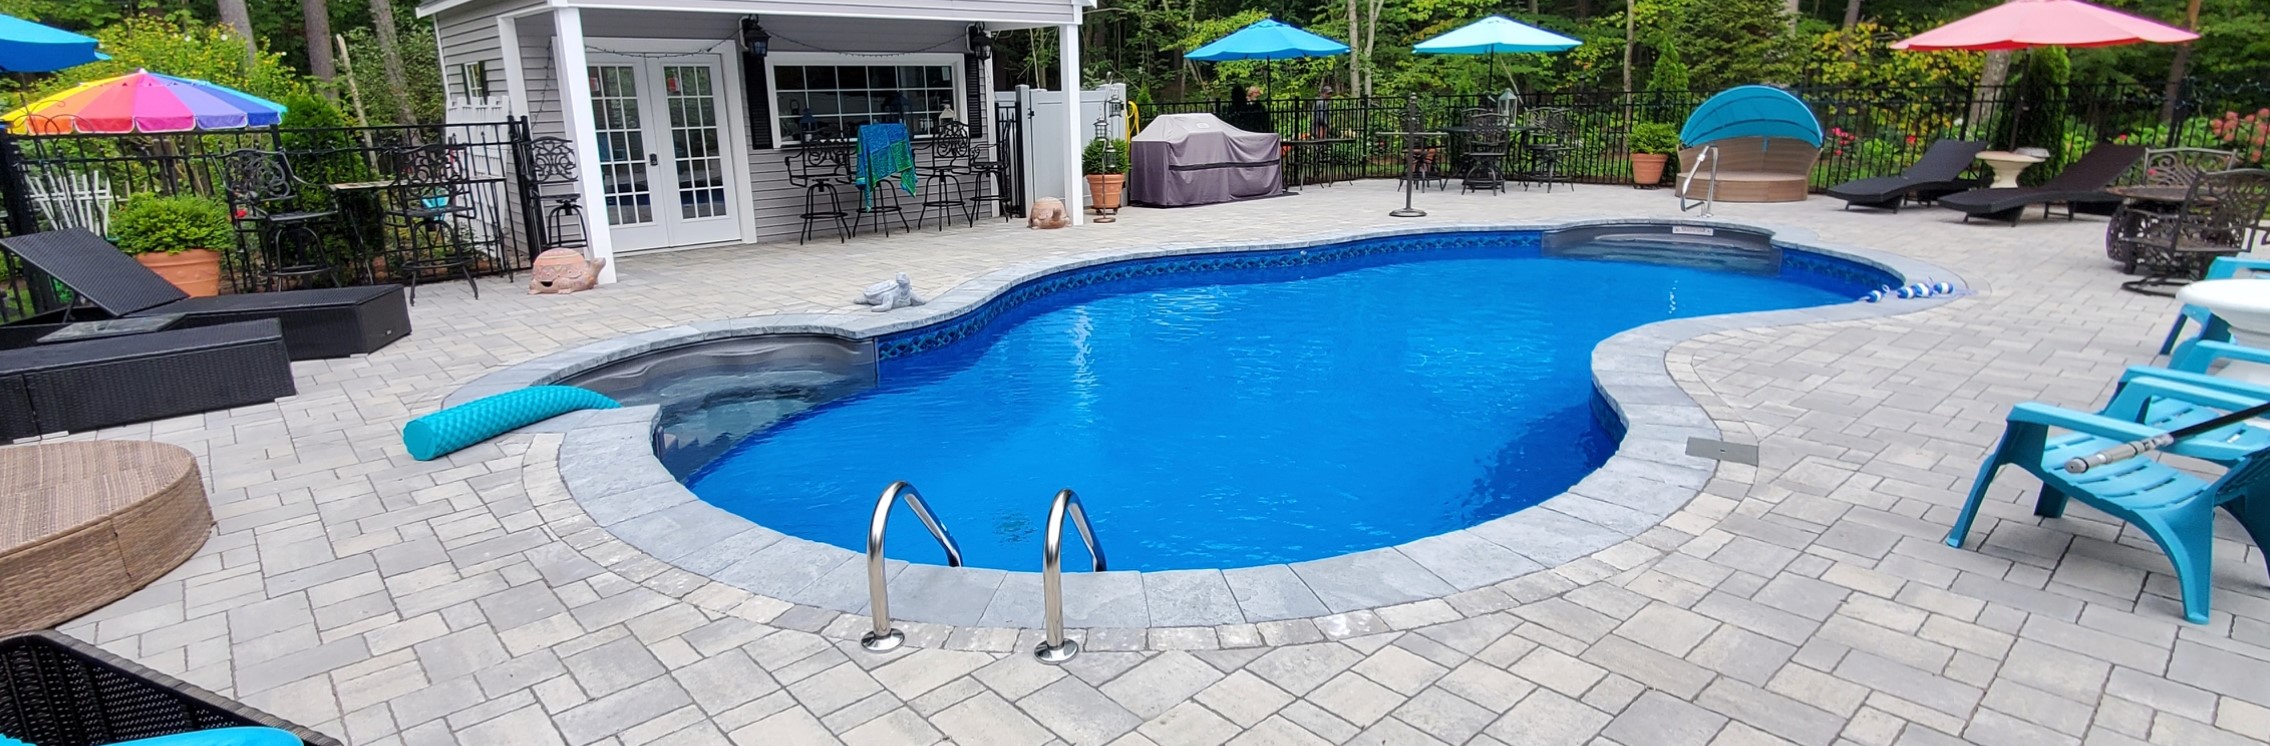 Londonderry Nh Pool Company Daigle Pools, Solid Ground Landscaping Wingham Nh